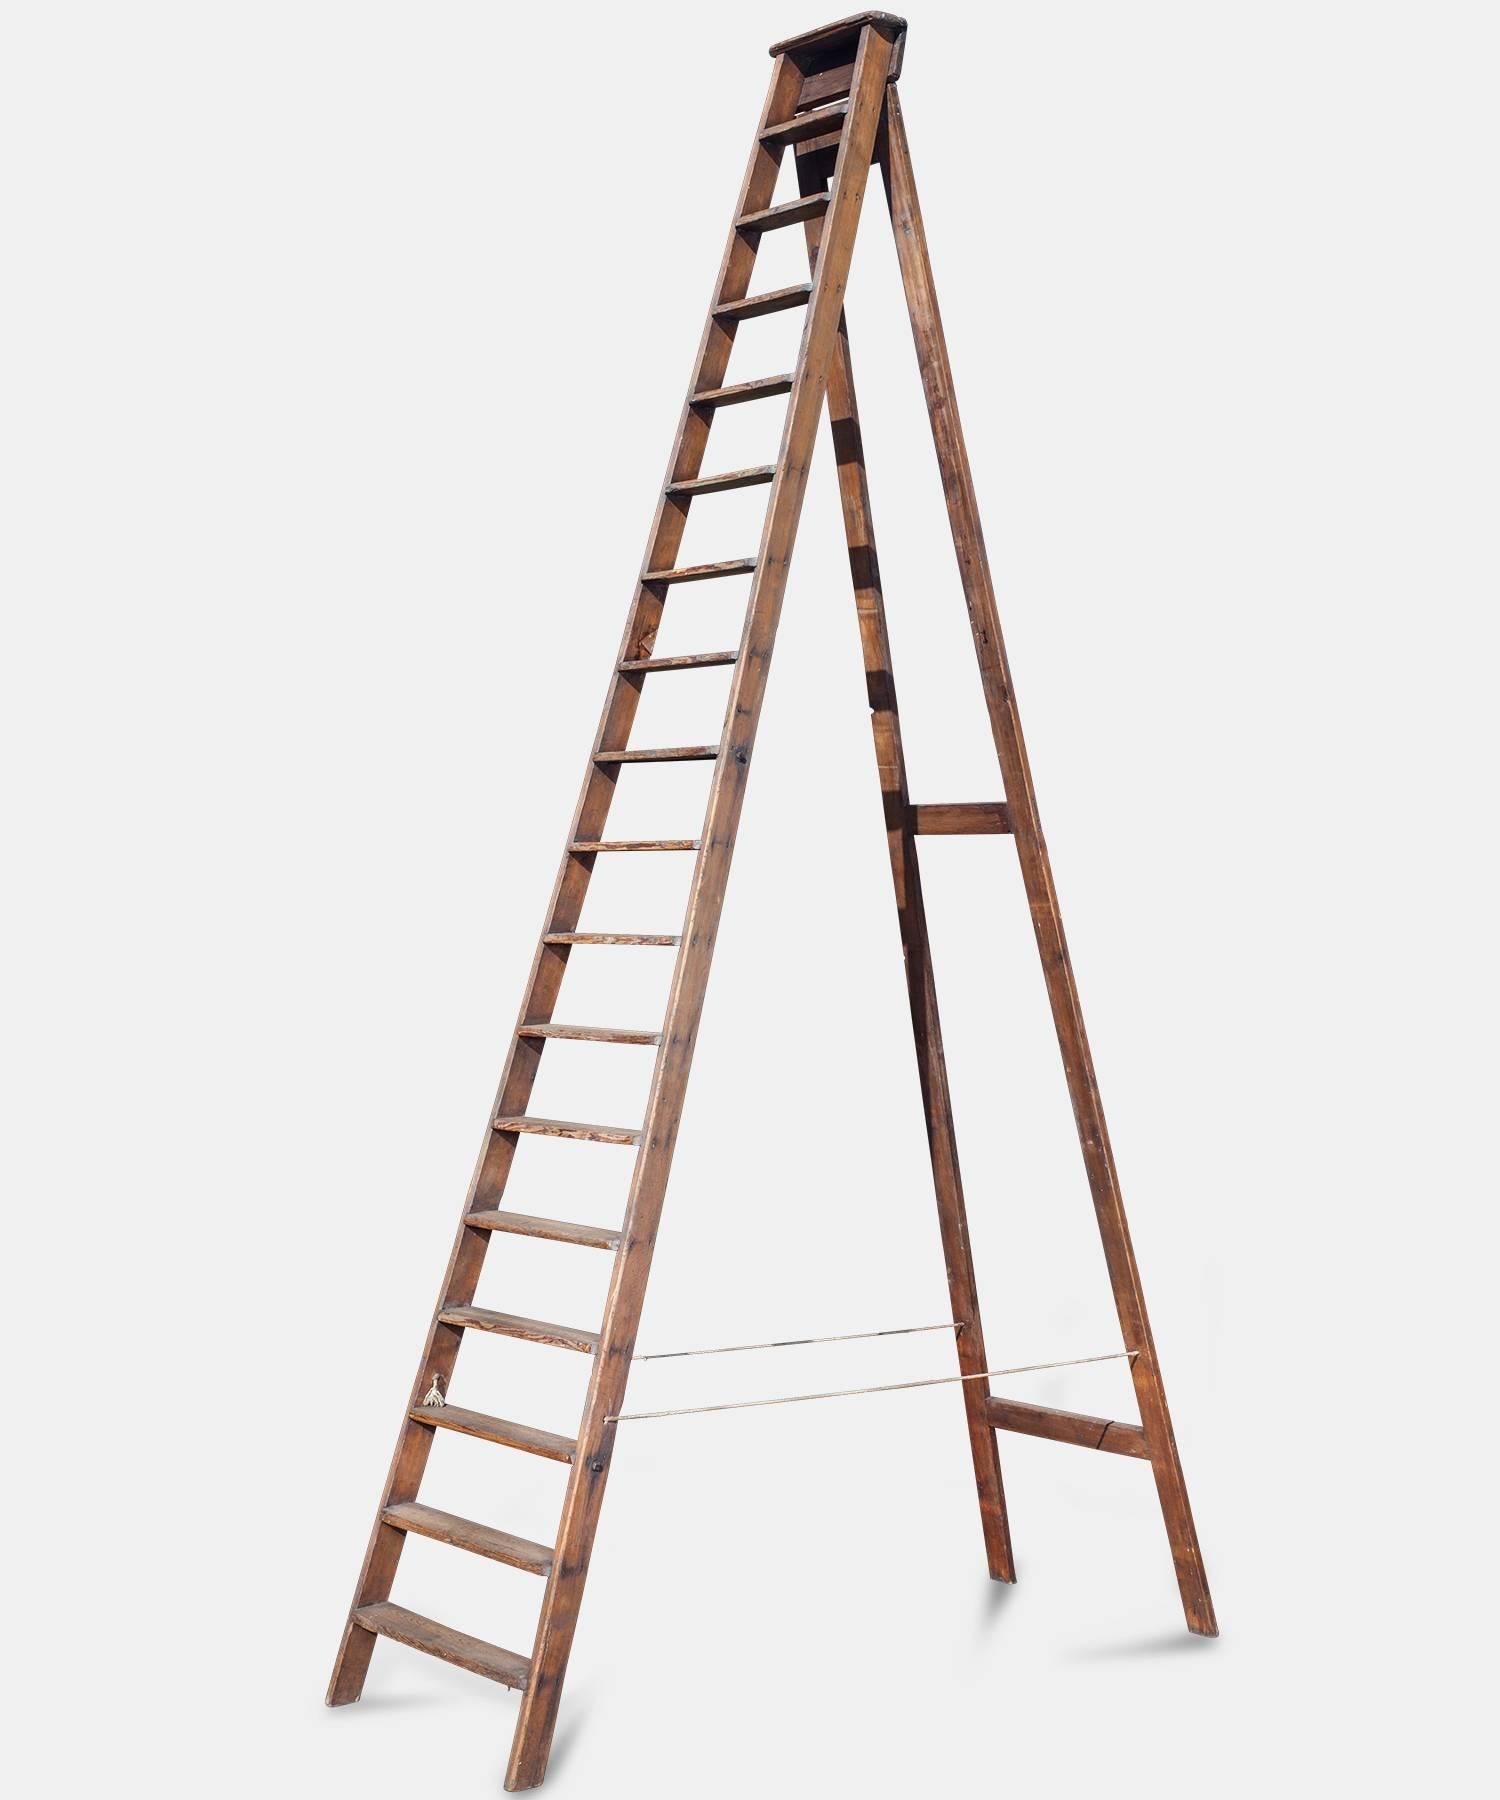 Solid wood ladder with impressive height.